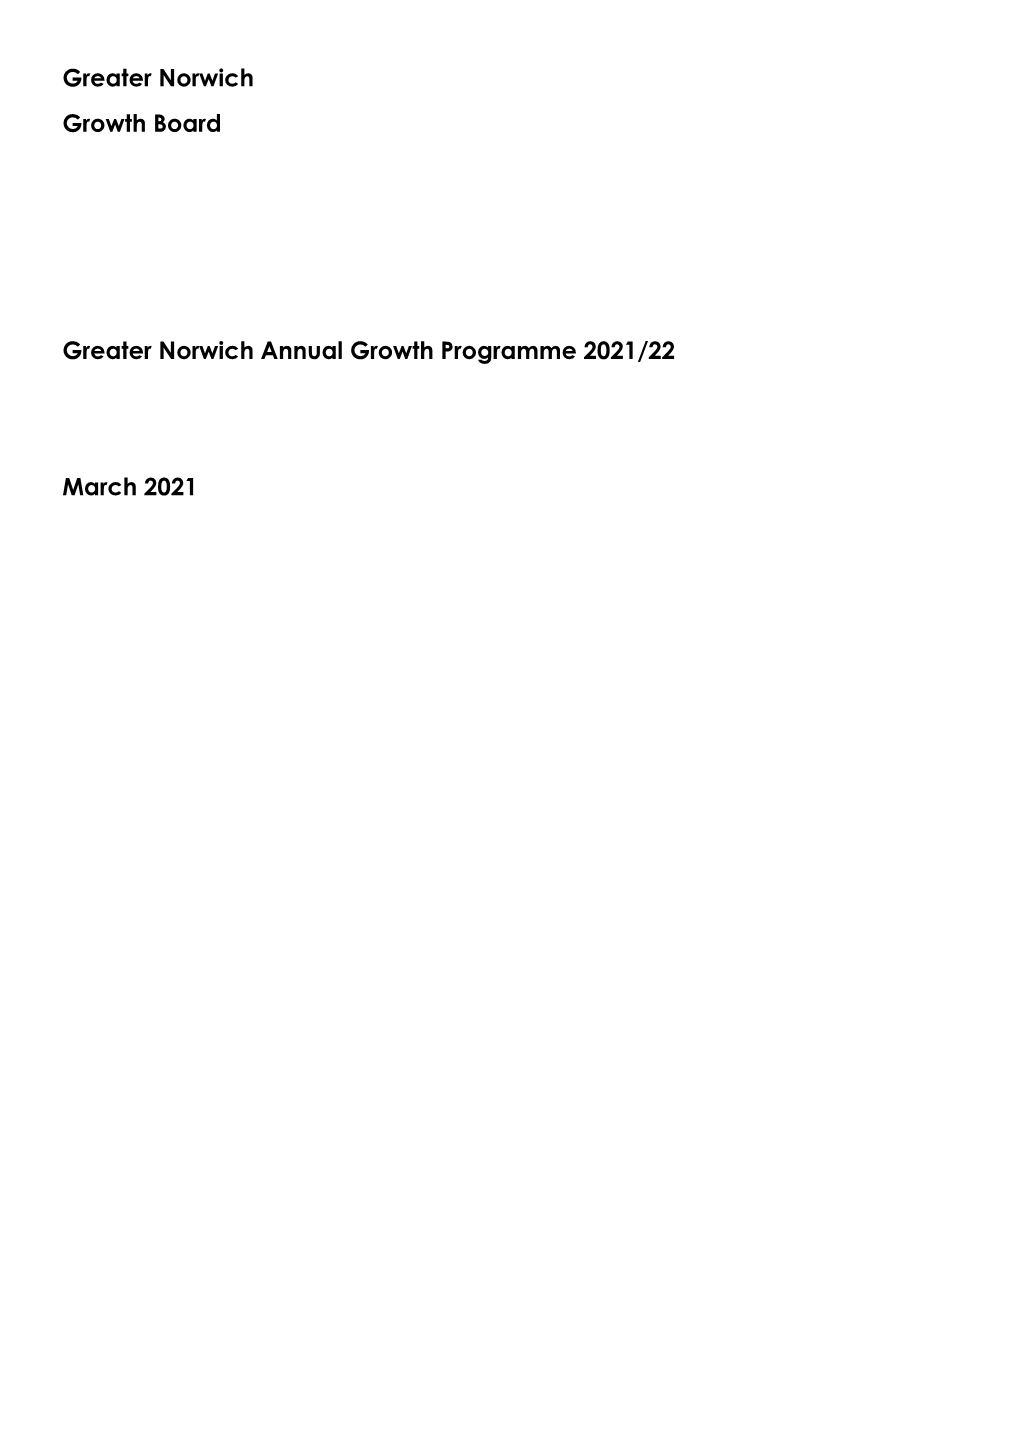 Greater Norwich Growth Programme 17